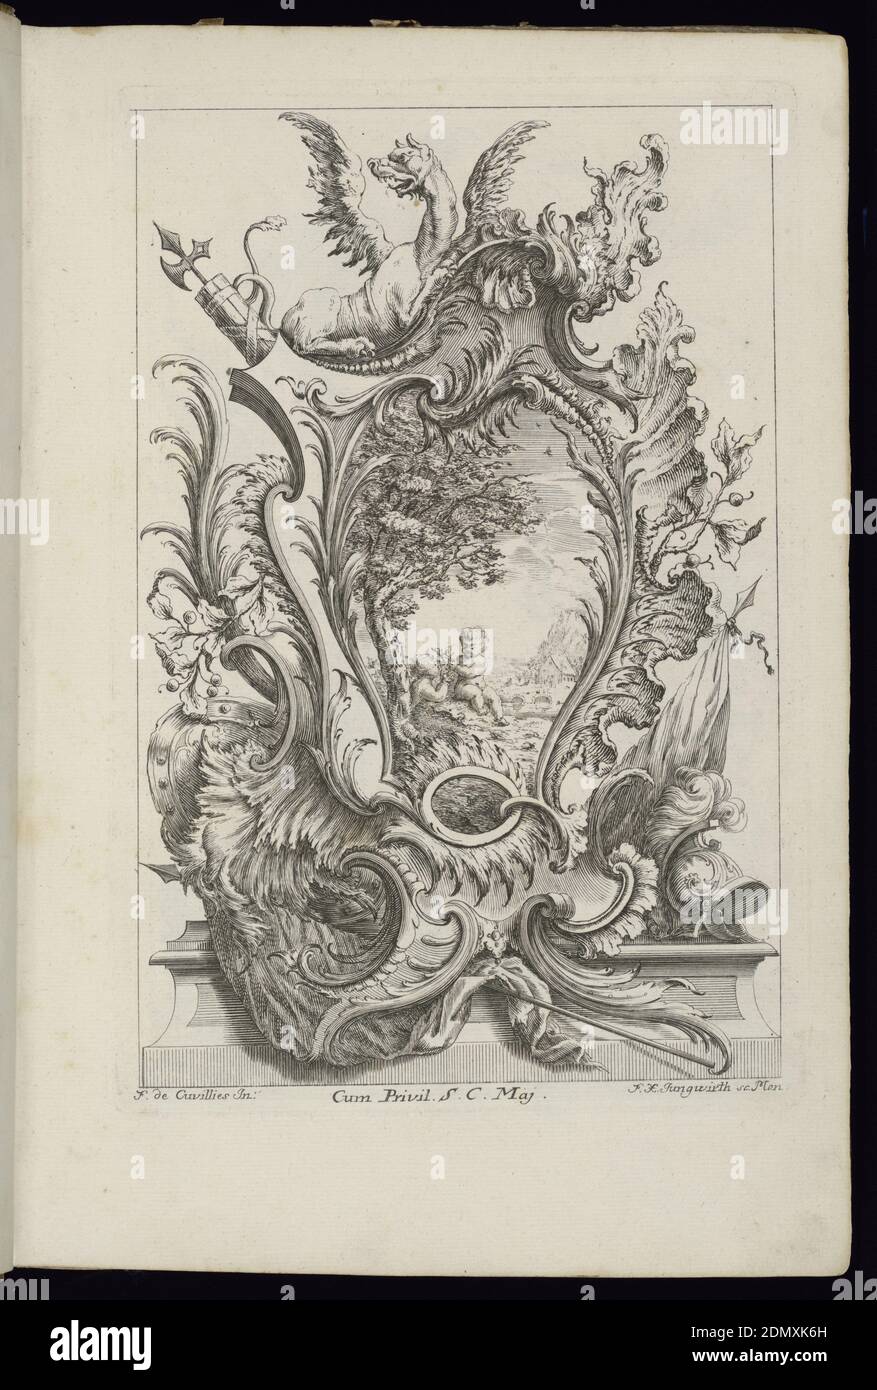 Cartouche with a Dragon and Armorial Trophy, Livre de Cartouches à divers usages (Book of Cartouches for Different Uses), François de Cuvilliés the Elder, Belgian, active Germany, 1695 - 1768, Franz Xaver Andreas Jungwierth, German, 1720–1790, François de Cuvilliés the Elder, Belgian, active Germany, 1695 - 1768, Etching and engraving on paper, Cartouche framed with a winged dragon and battle weapons (including spear, helmet, ax, shield). Within cartouche, a figural scene in Rococo style depicting two putti in a field below a tree--a town or village in background., Munich, Germany, 1738 Stock Photo